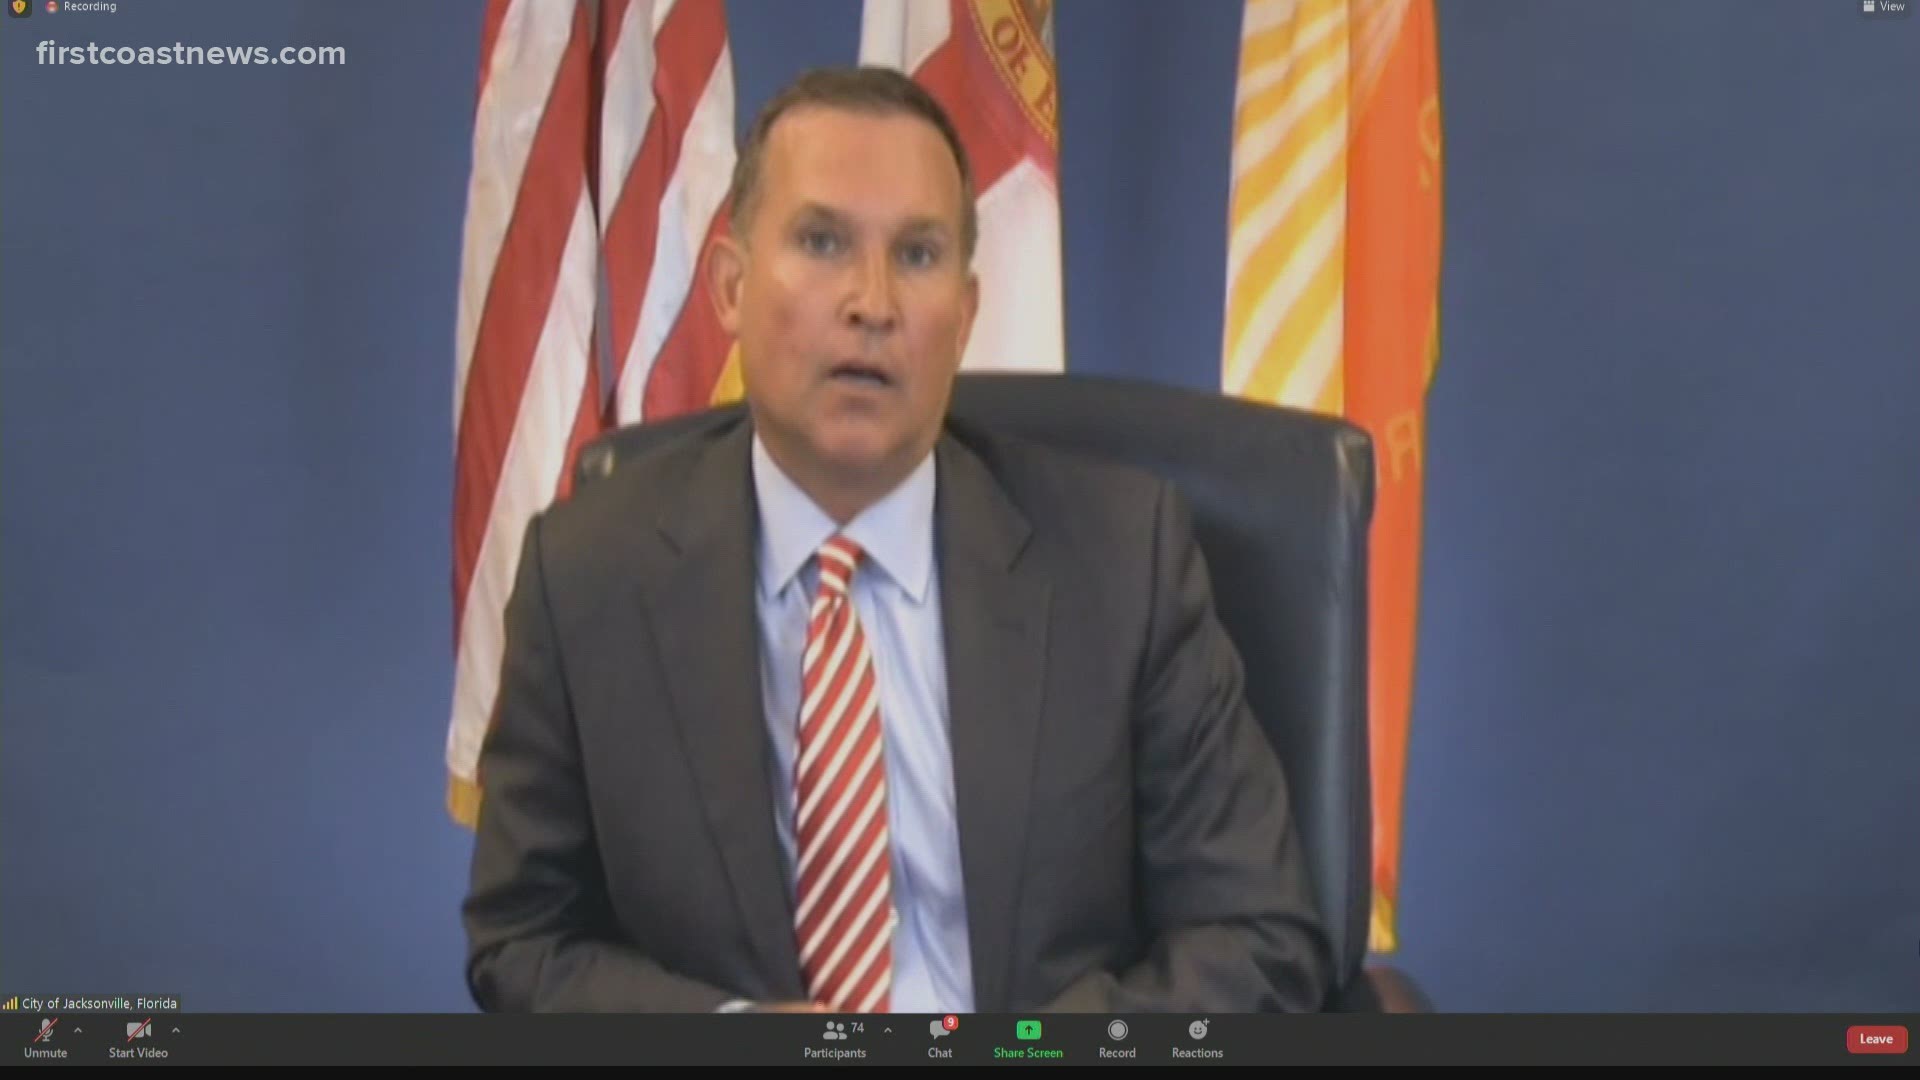 Jacksonville Mayor Lenny Curry and health leaders urged people to get vaccinated during a Wednesday virtual news conference.